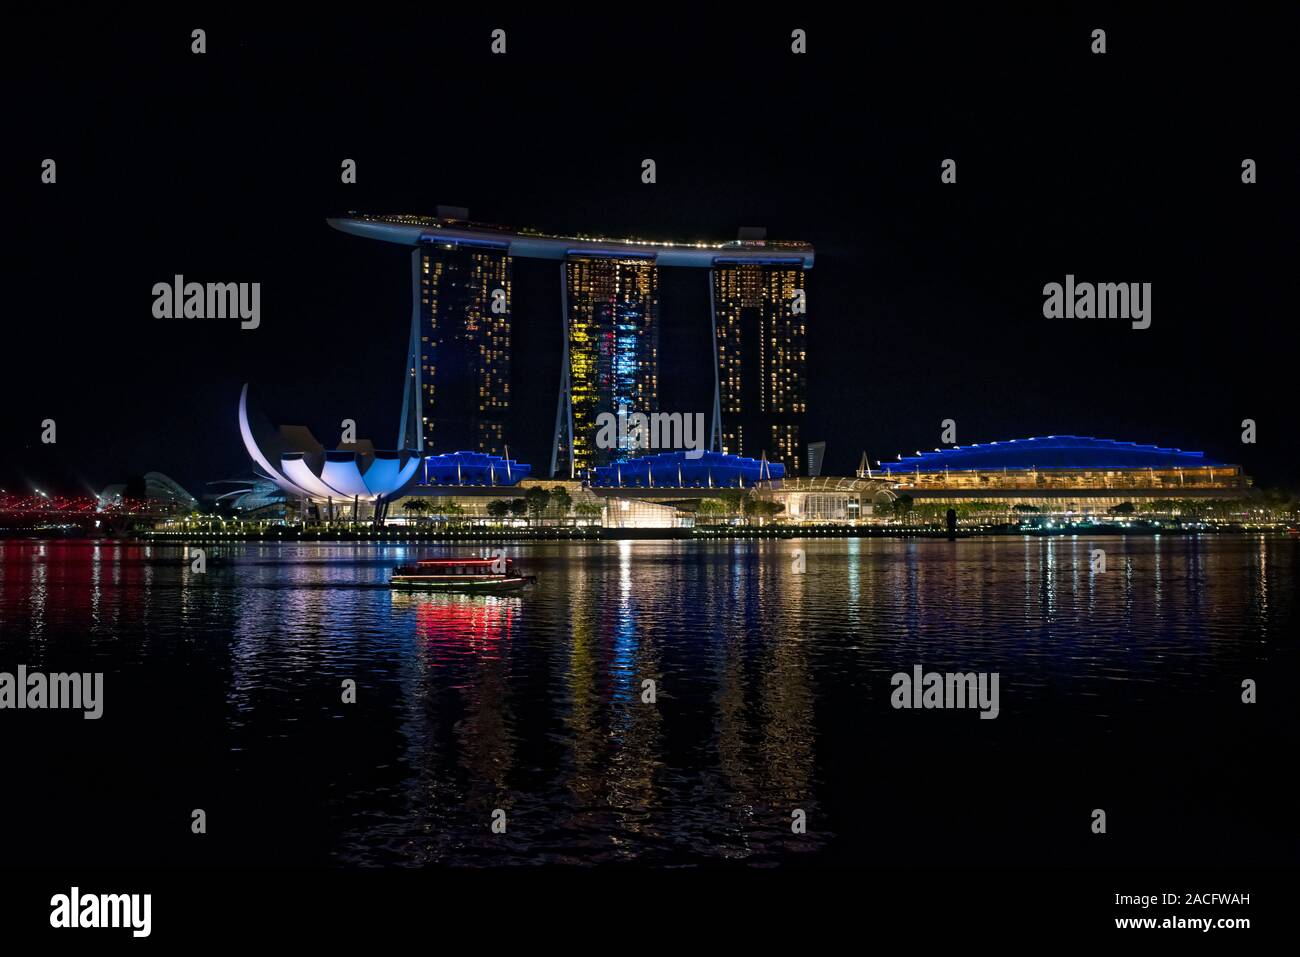 The lights of Marina Bay Sands hotel reflecting on the water of Marina Ba with a tourist sightseeing boat, Singapore Stock Photo